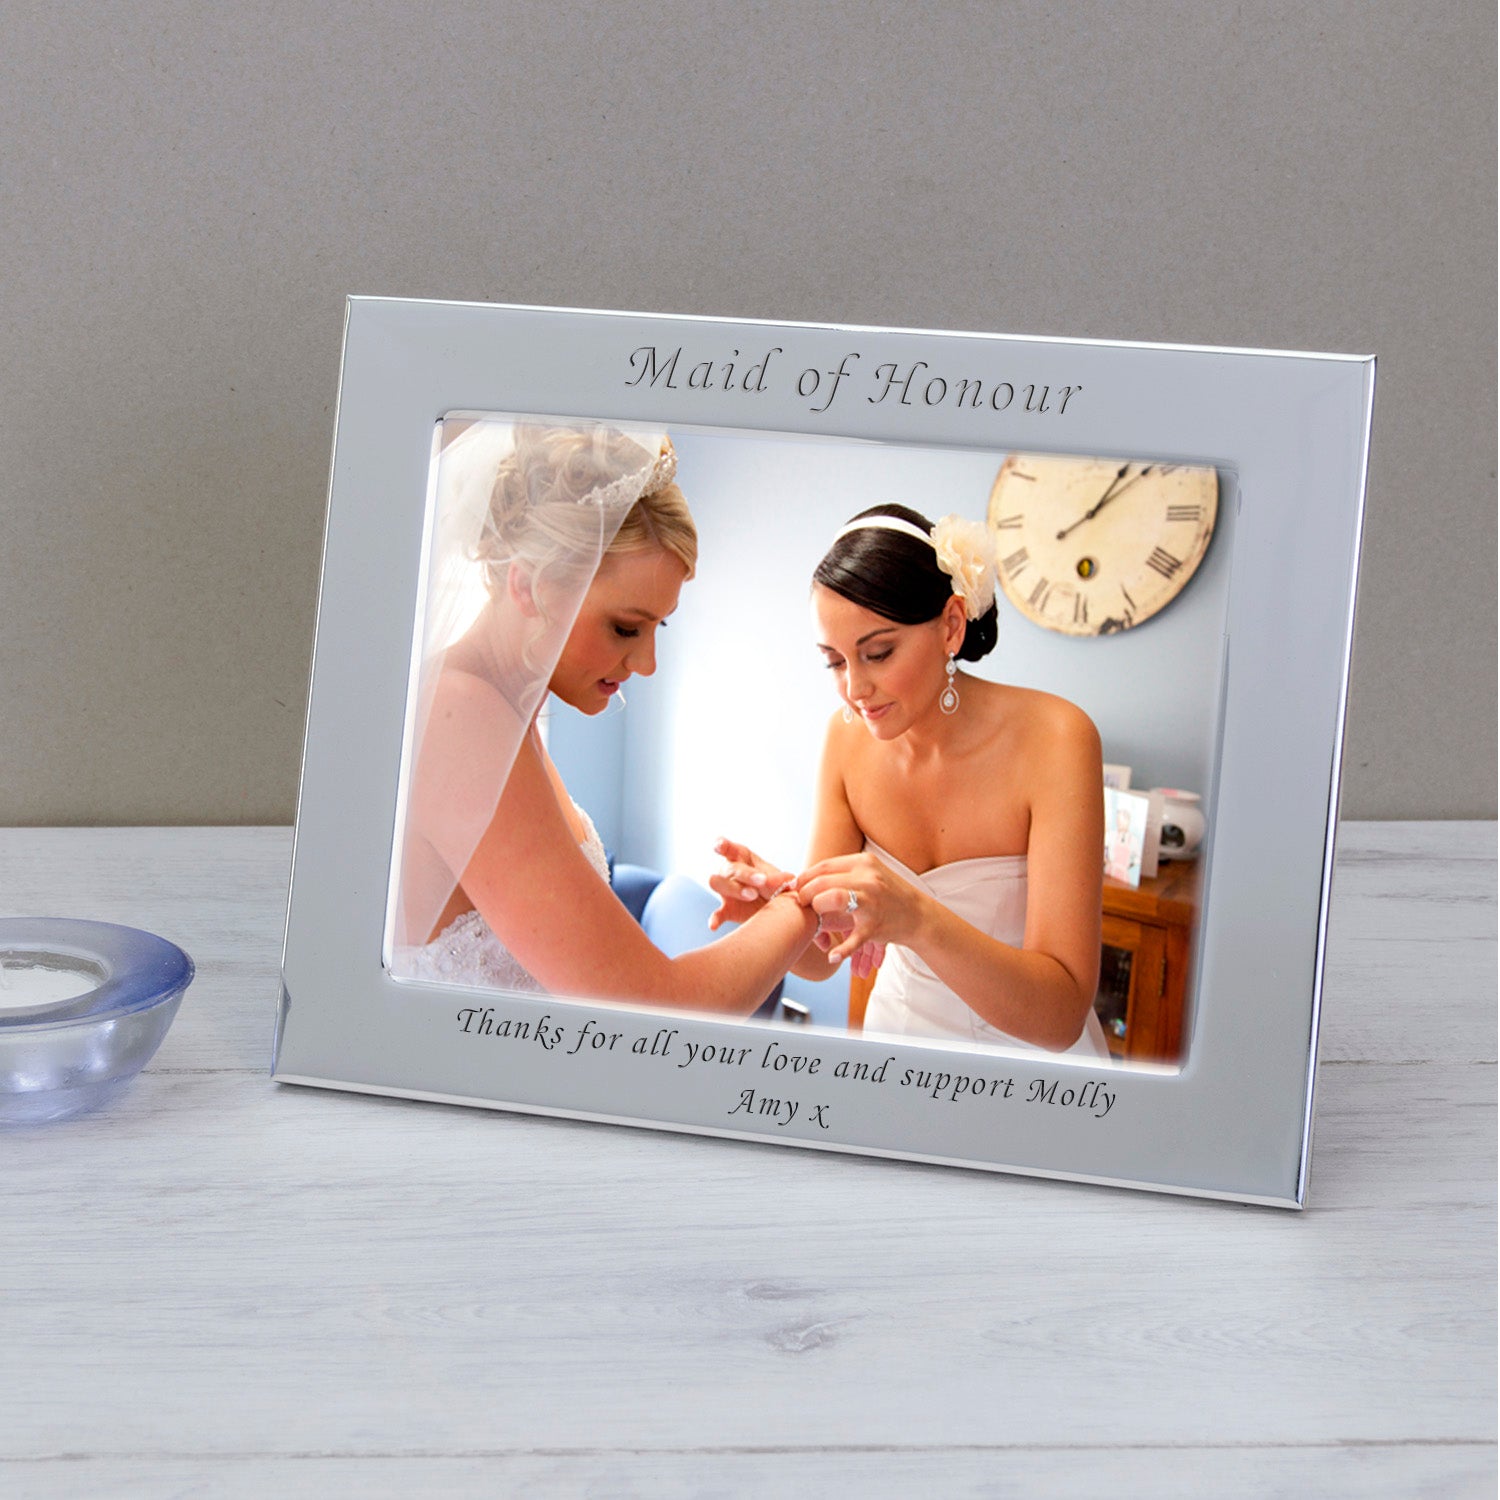 Personalised Maid of Honour Silver Plated Photo Frame